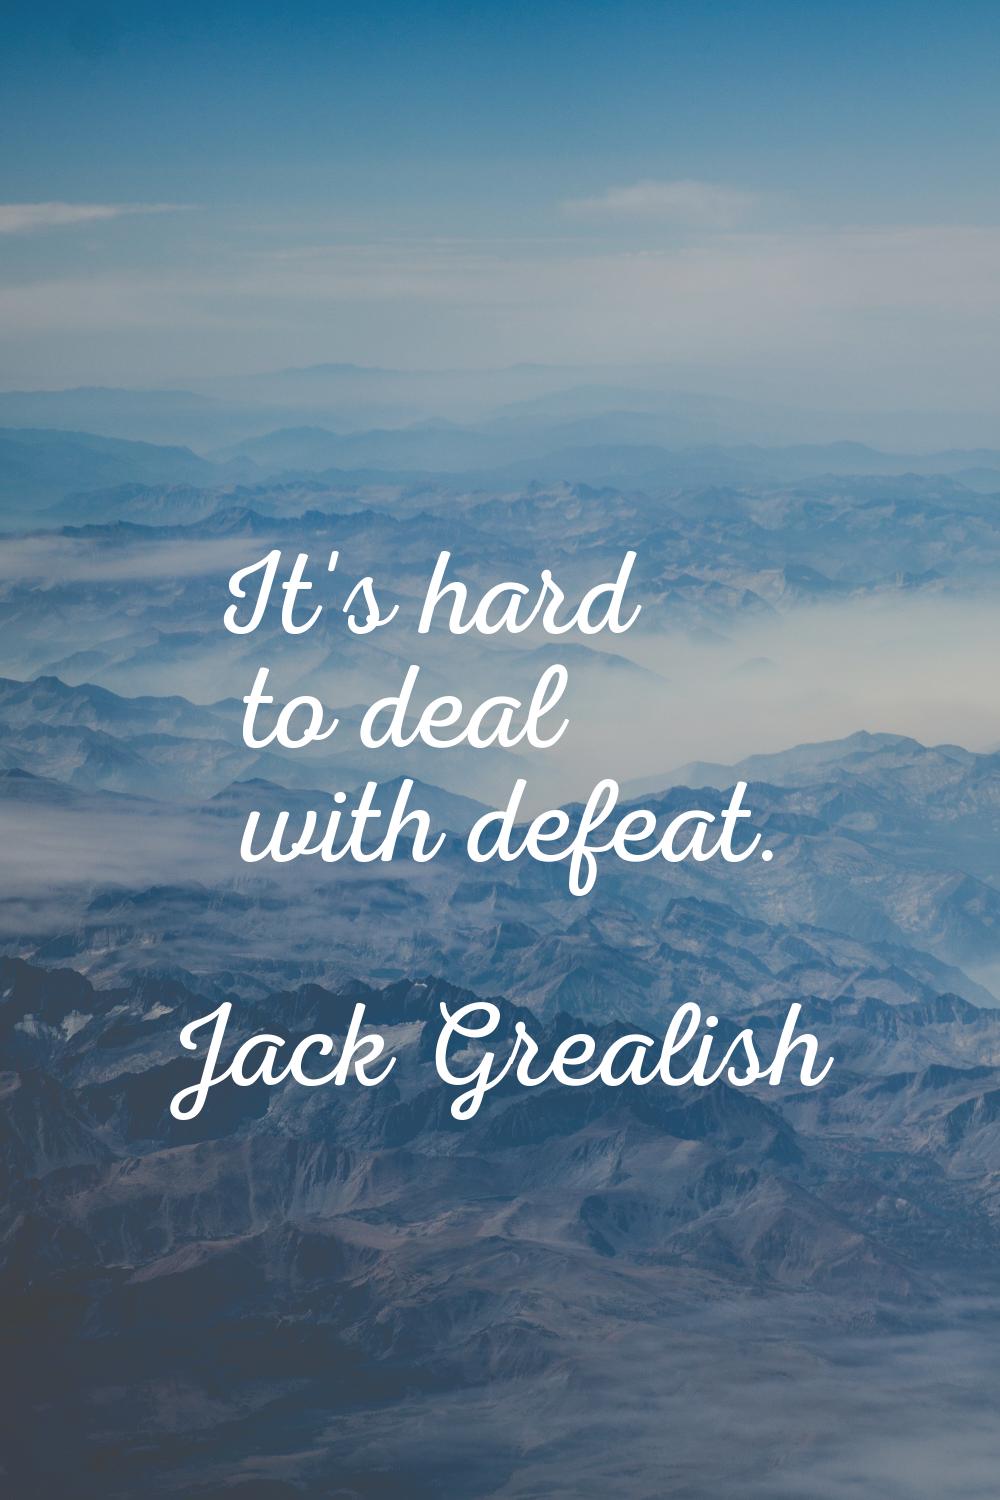 It's hard to deal with defeat.